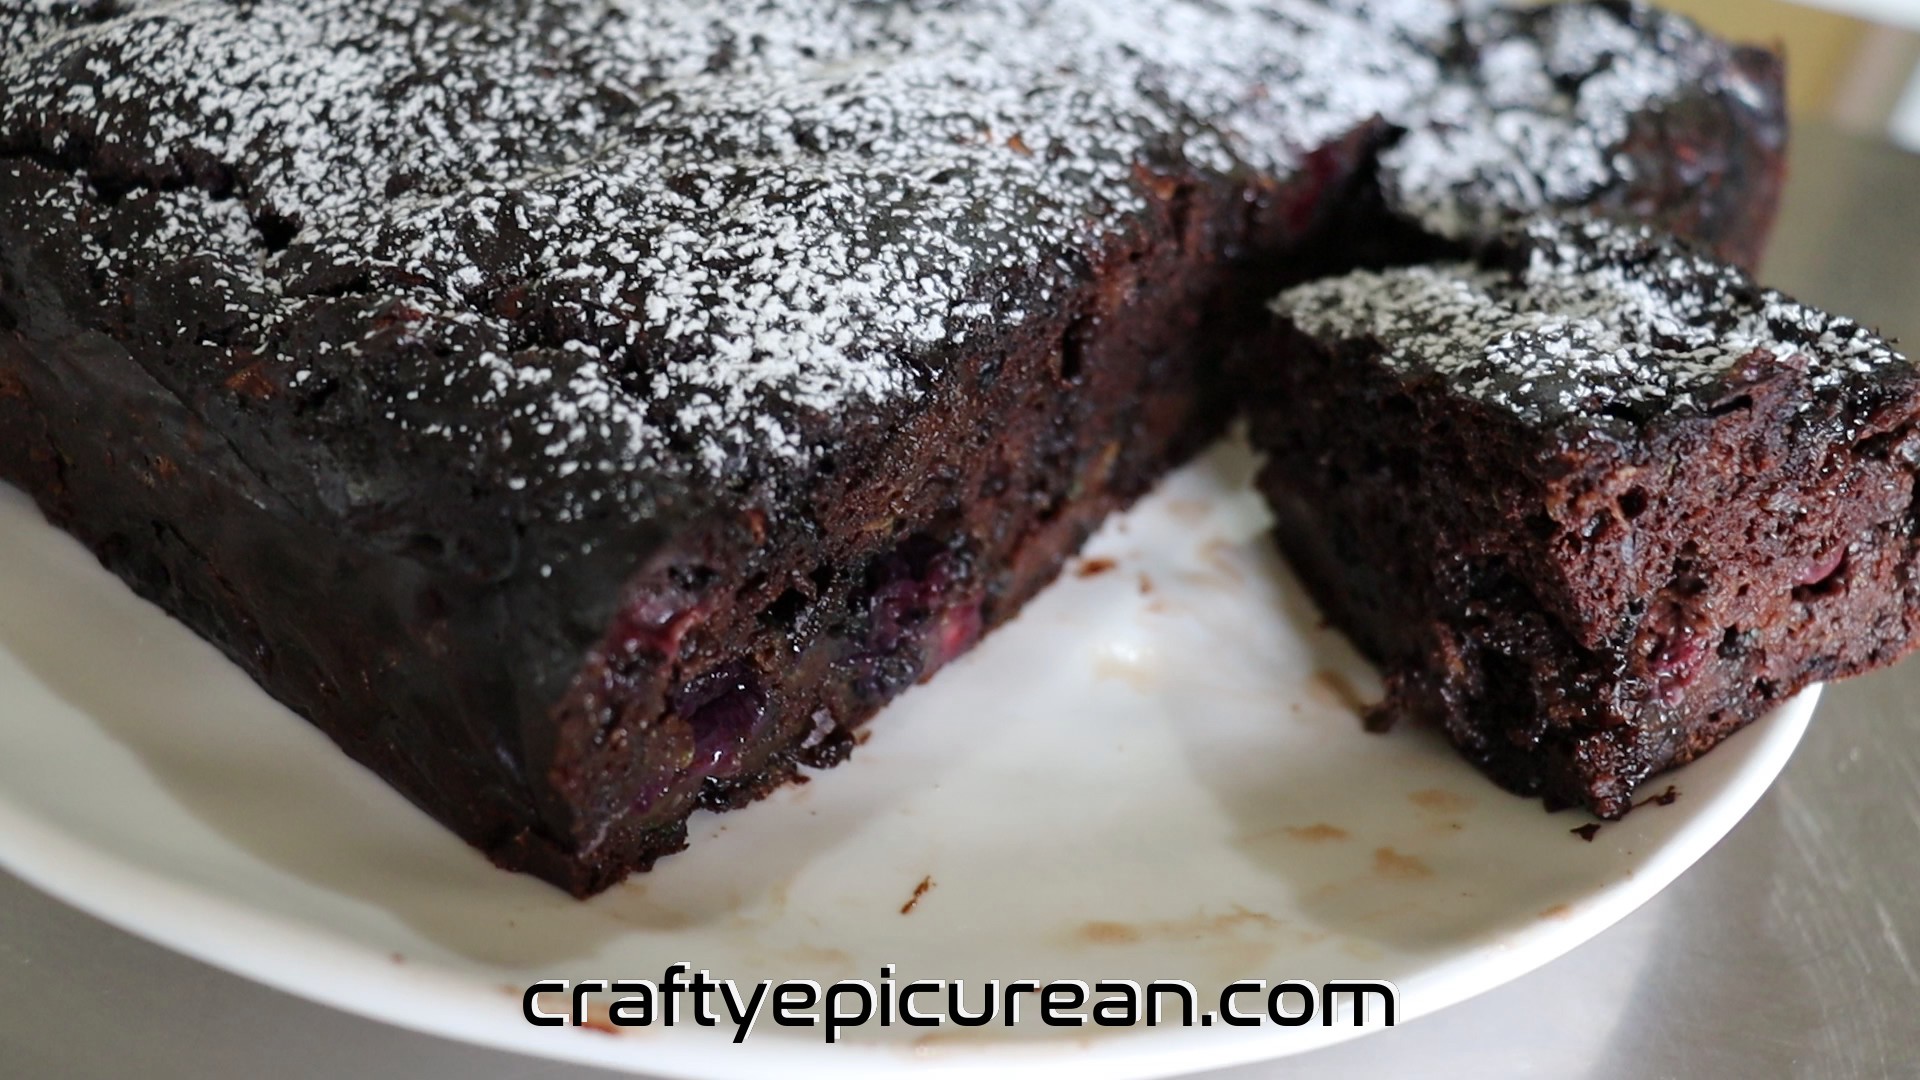 Chocolate Courgette Blueberry Cake